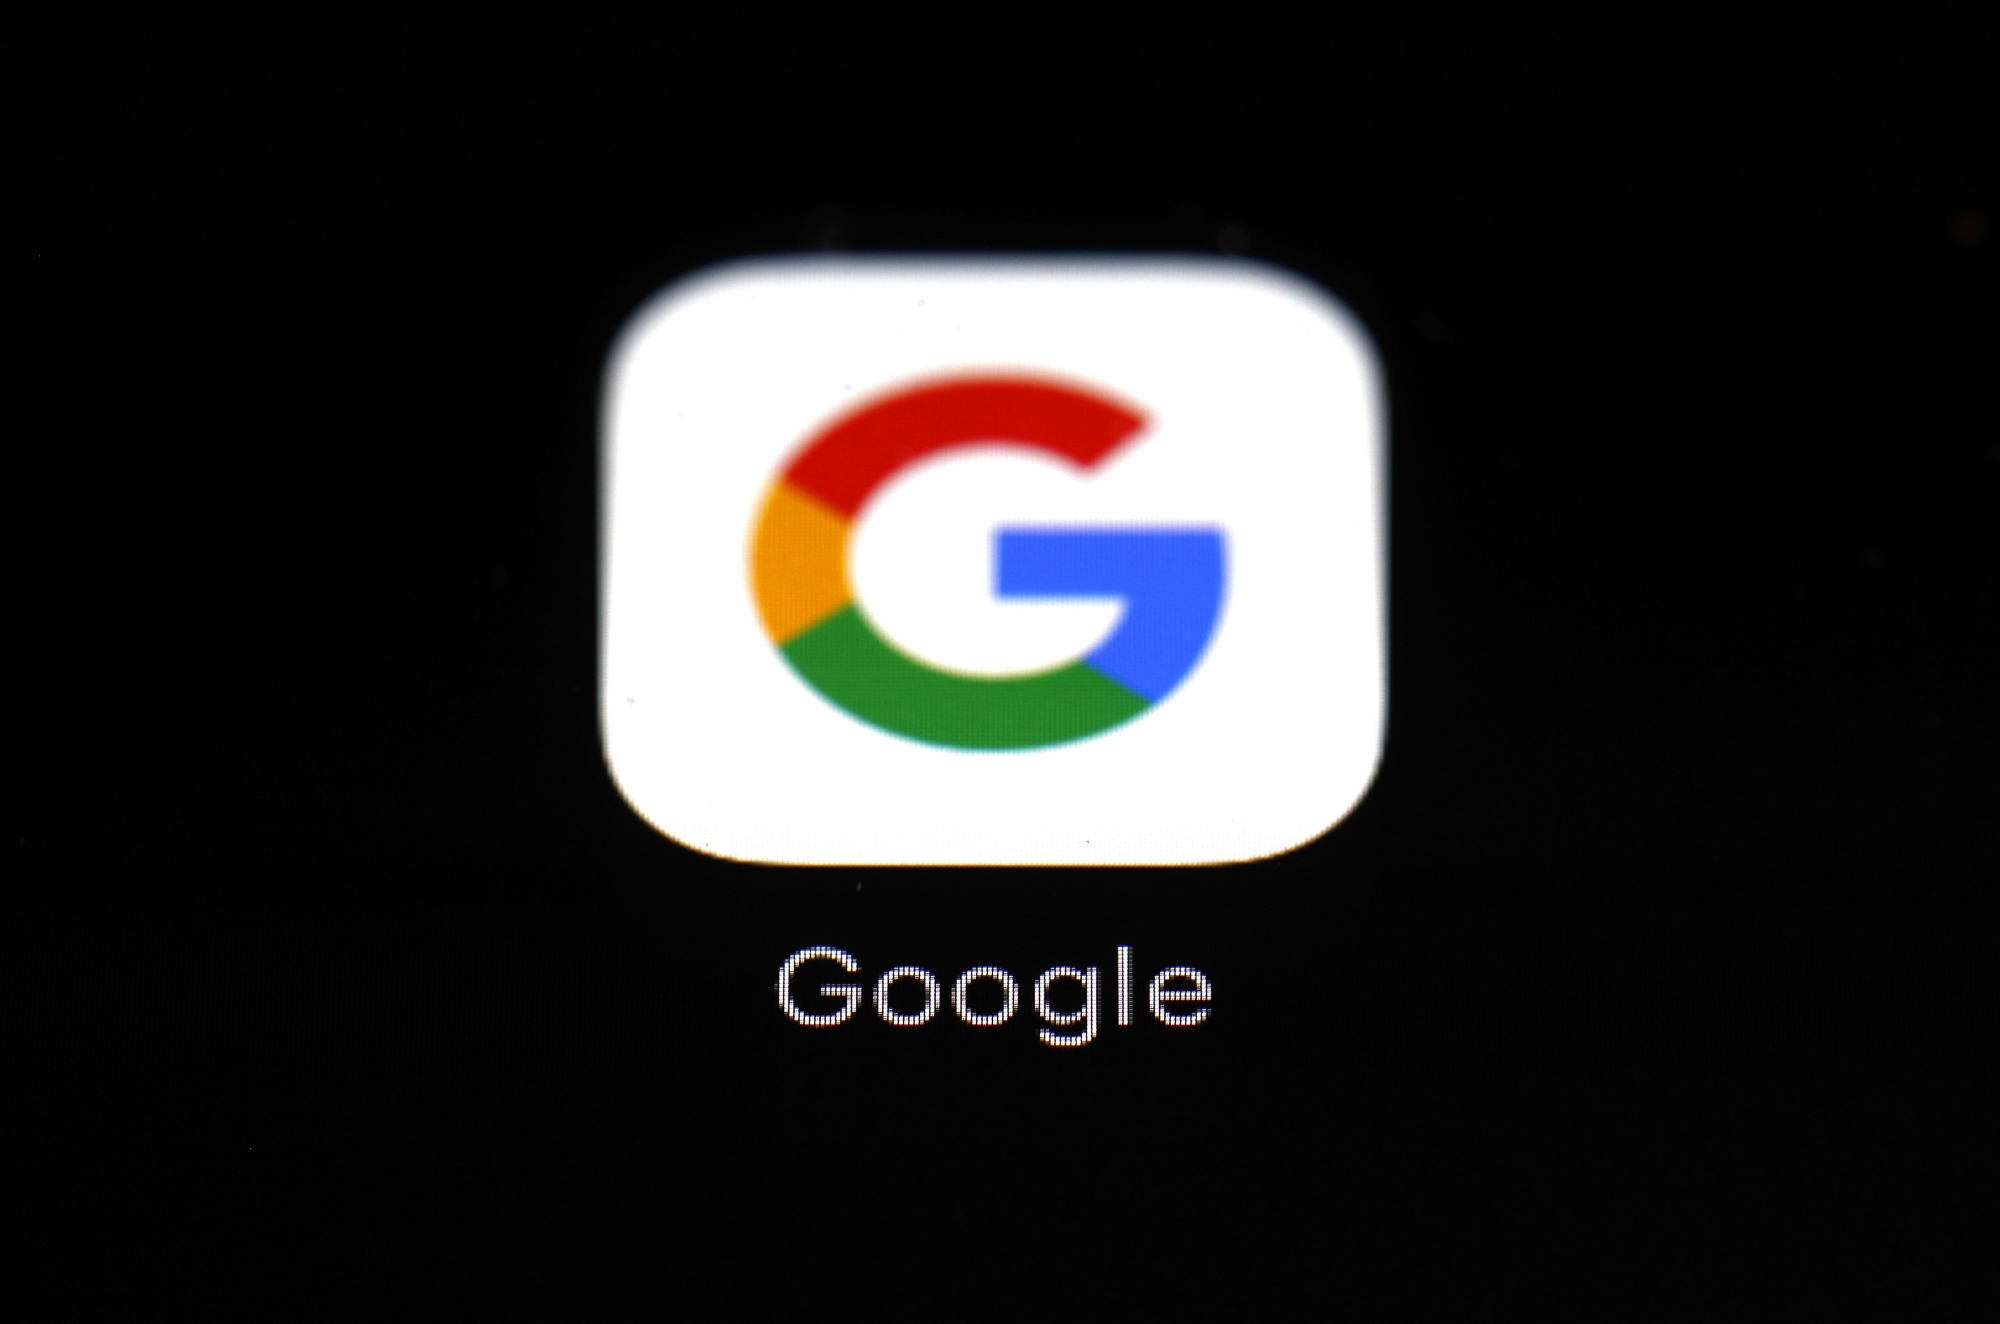 FILE - This March 19, 2018, file photo shows a Google app in Baltimore. Google will try to make a bigger splash in the smartphone market with a cheaper high-end model while it also aims to expand its presence on bigger screens with a new TV service. The products unveiled Wednesday, Sept. 30, 2020, focus on two areas where Google has struggled to make significant inroads. (AP Photo/Patrick Semansky, File) ArcInfo